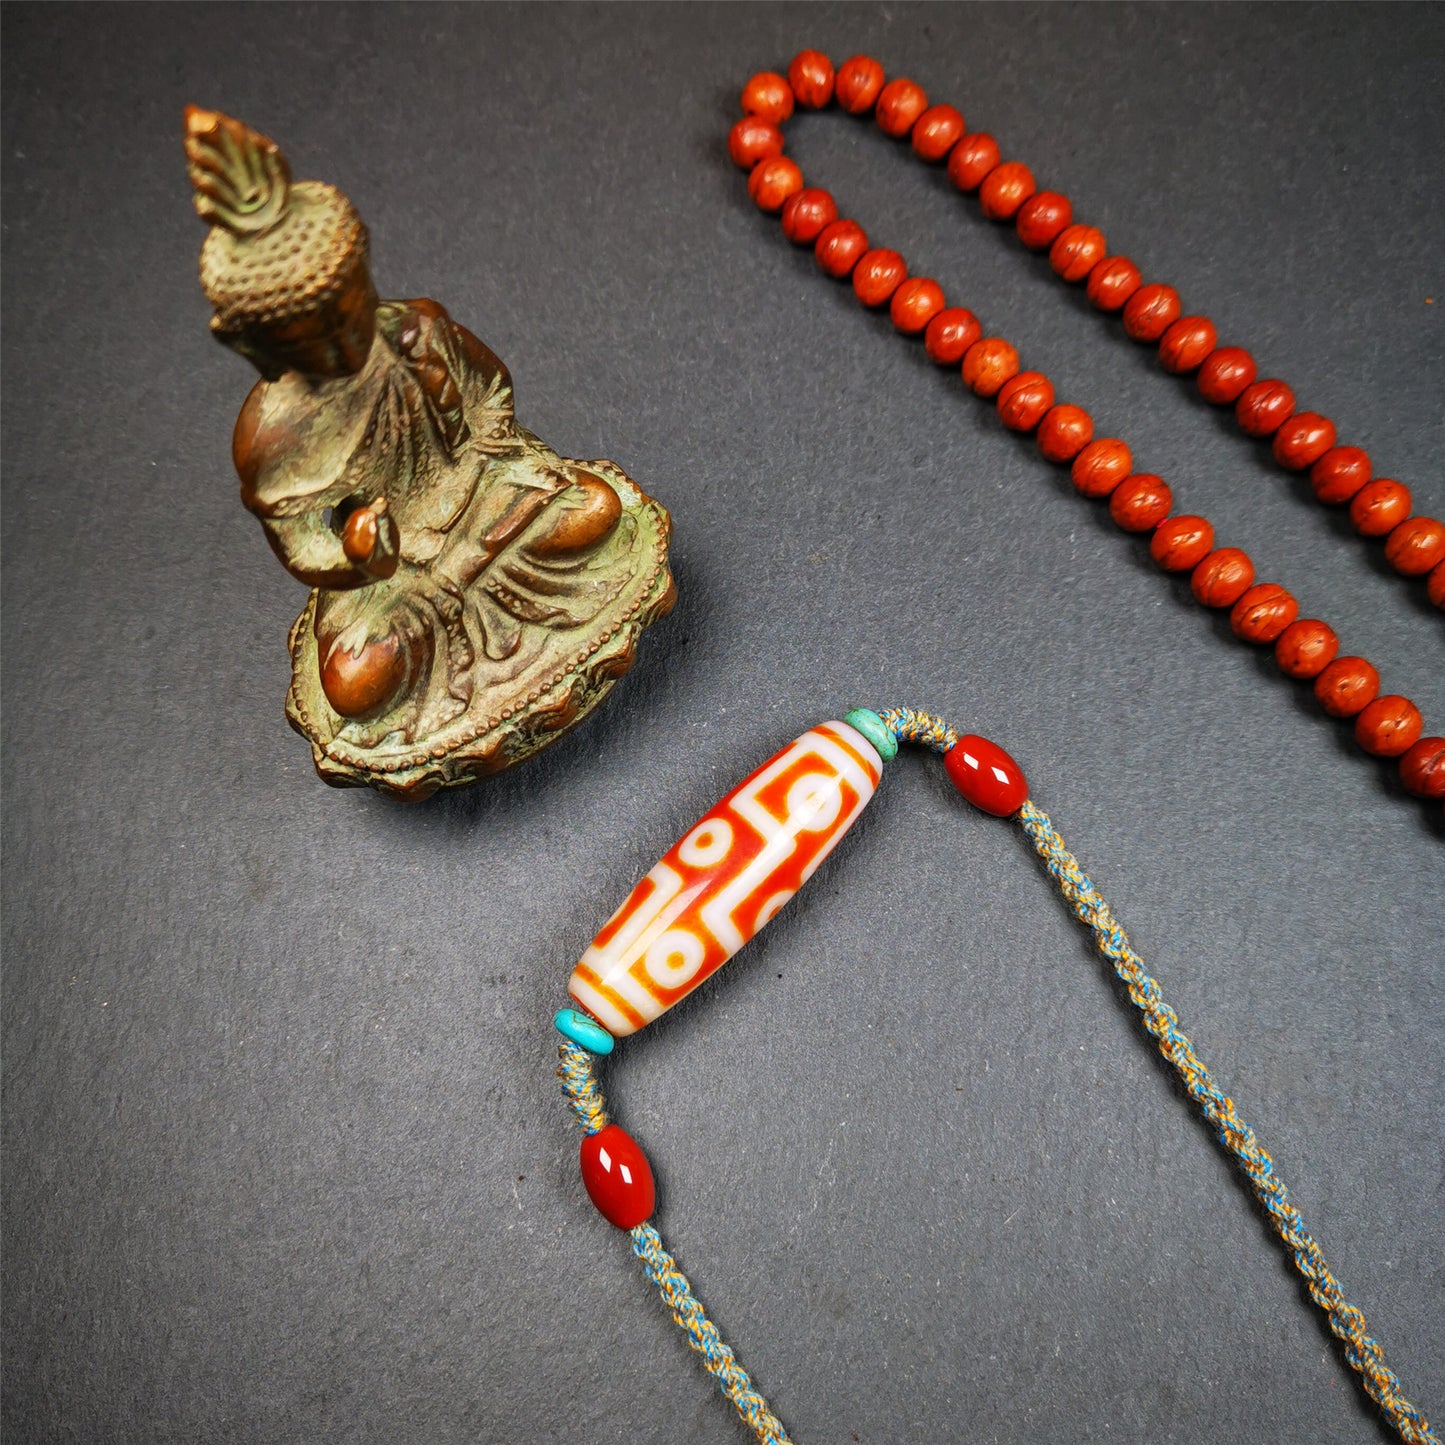 This necklace was hand-woven by Tibetans from Baiyu County, the main bead is a fire agate 9 eyes dzi, paired with 2 turquoise beads and 2 red agate beads,about 30 years old. The length of the necklace can be adjusted, the maximum circumference is about 60cm.